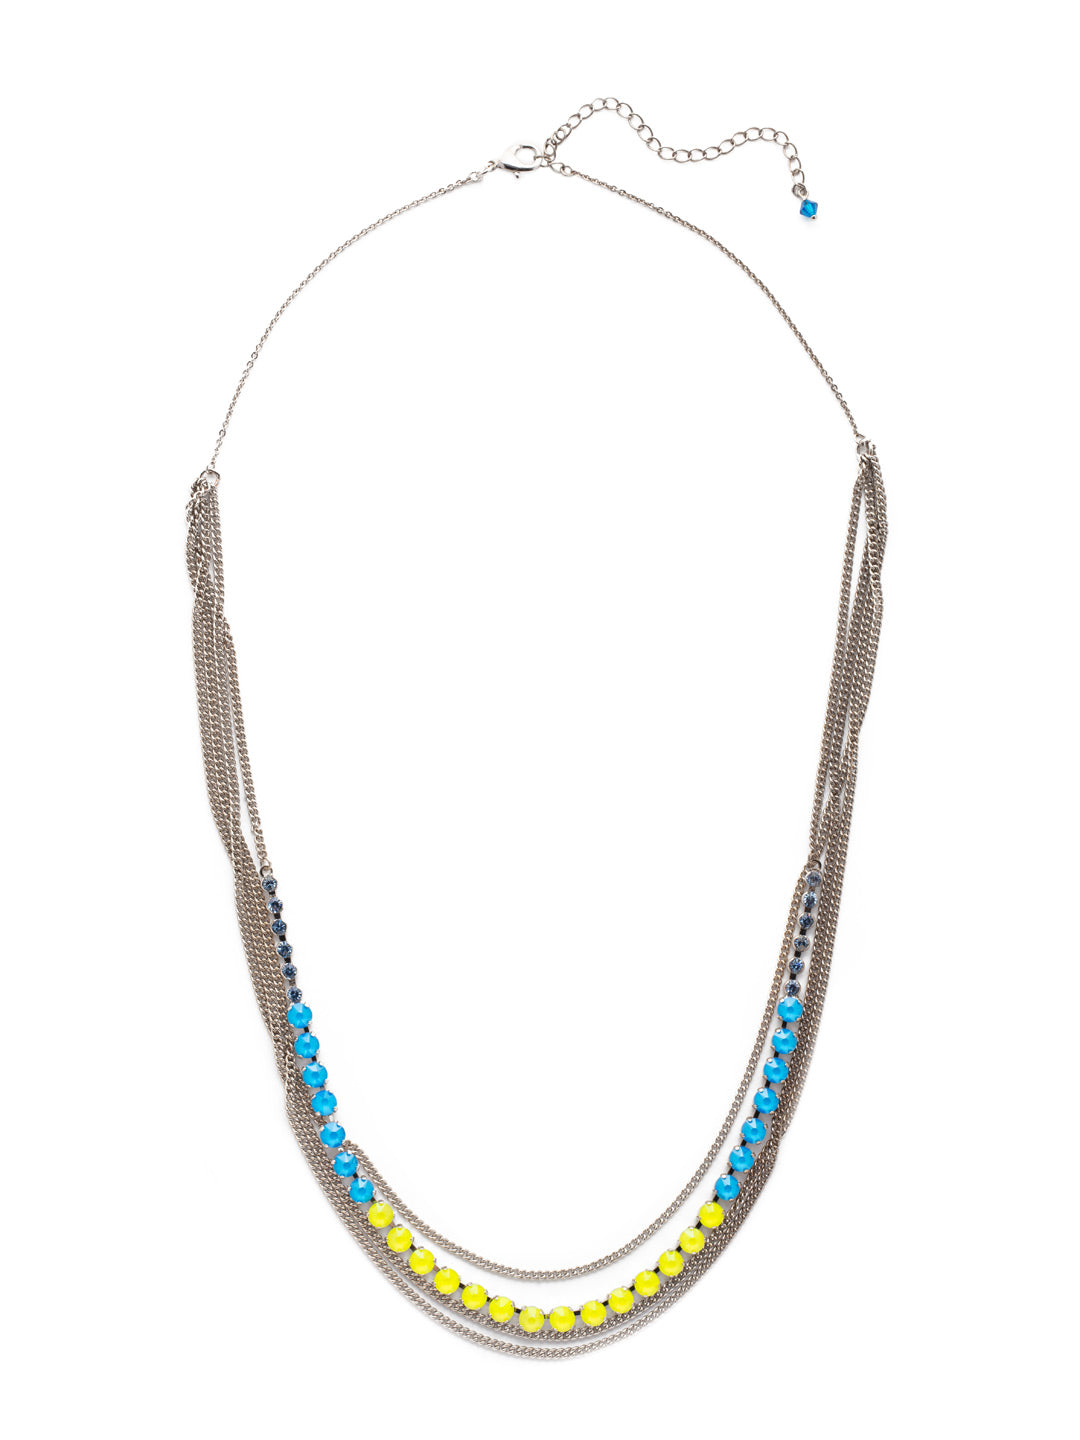 Layer It On Multi-Strand Layered Necklace - NCR73PDBPY - <p>Styled for you. Rows of mixed metal chain and crystal intertwine in this quintessential long layered necklace! From Sorrelli's Blue Poppy collection in our Palladium finish.</p>